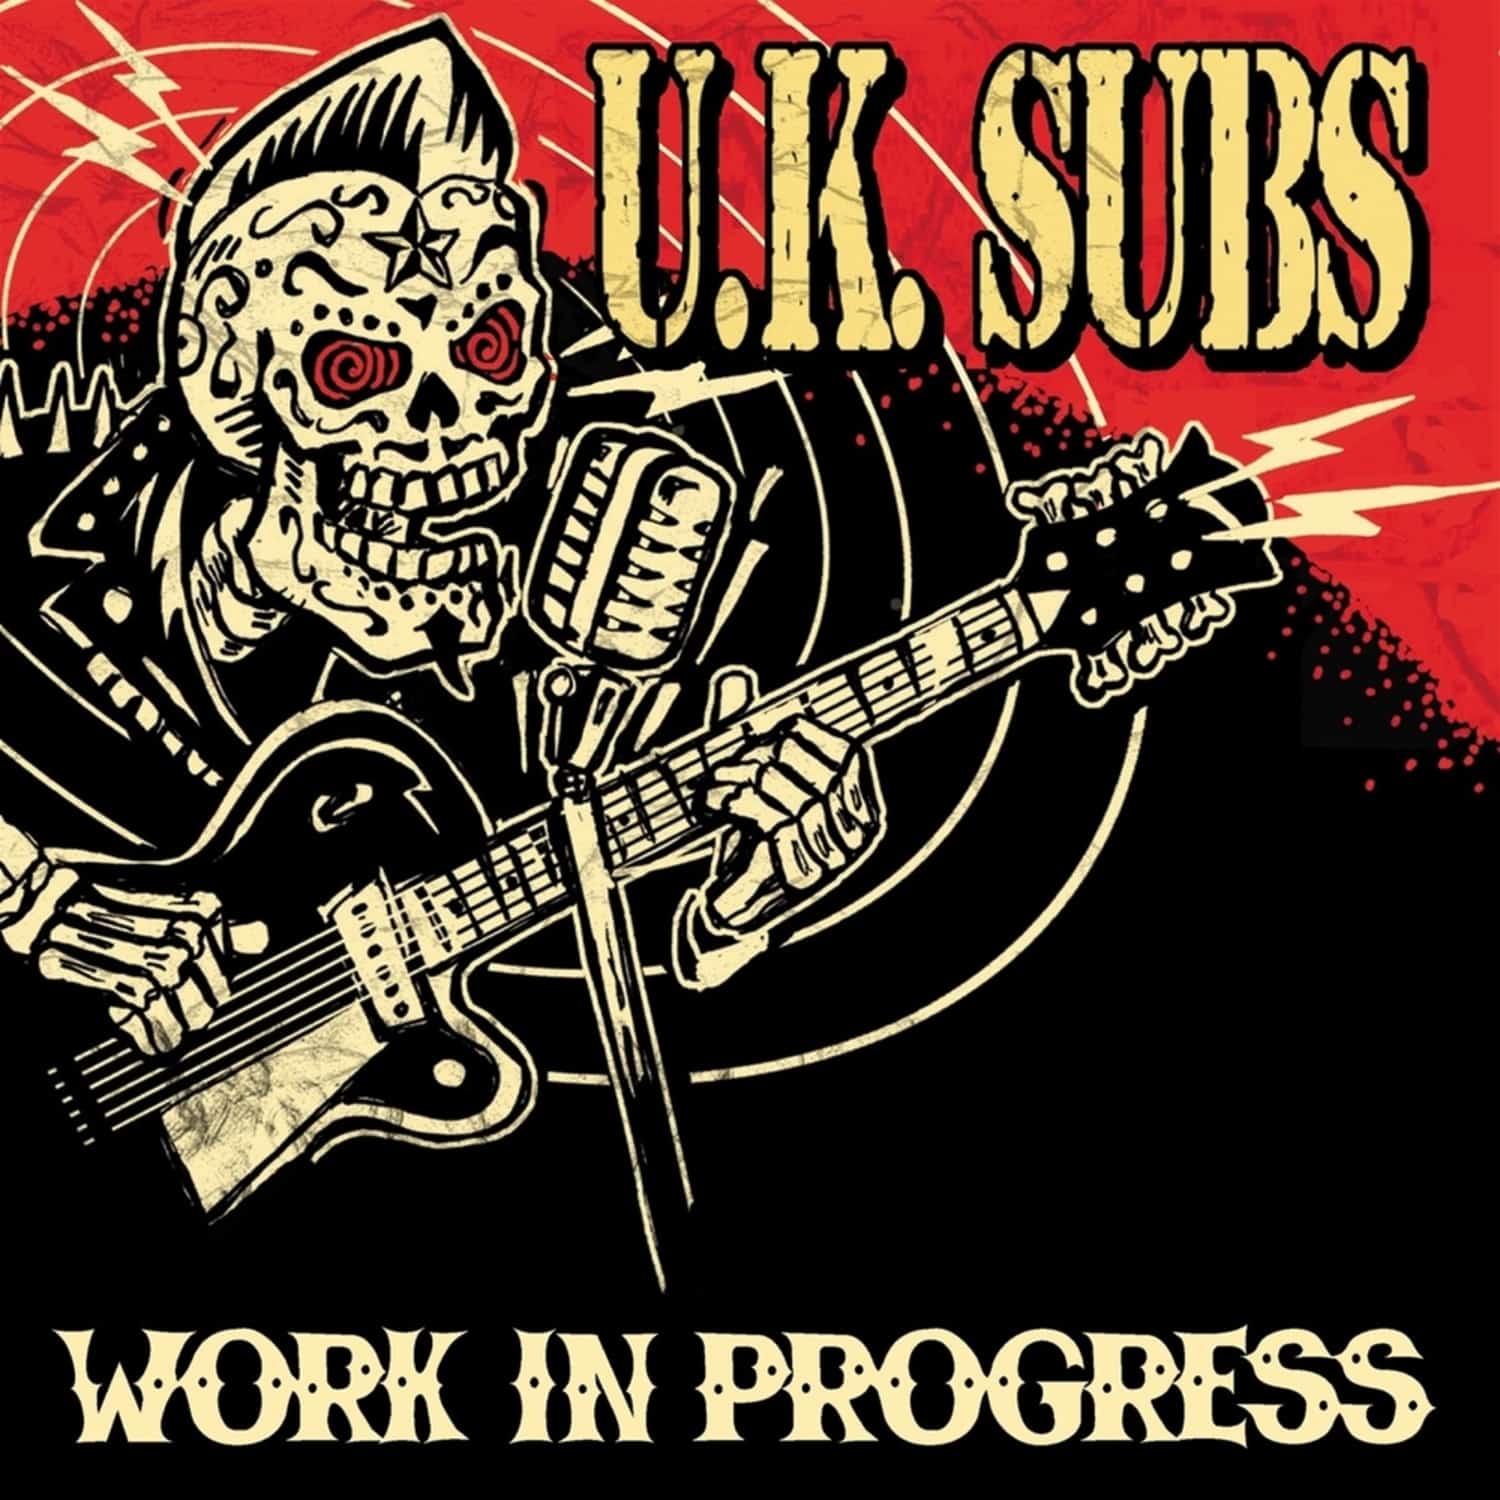 UK Subs - WORK IN PROGRESS-GOLD AND SILVER2 VINYL 